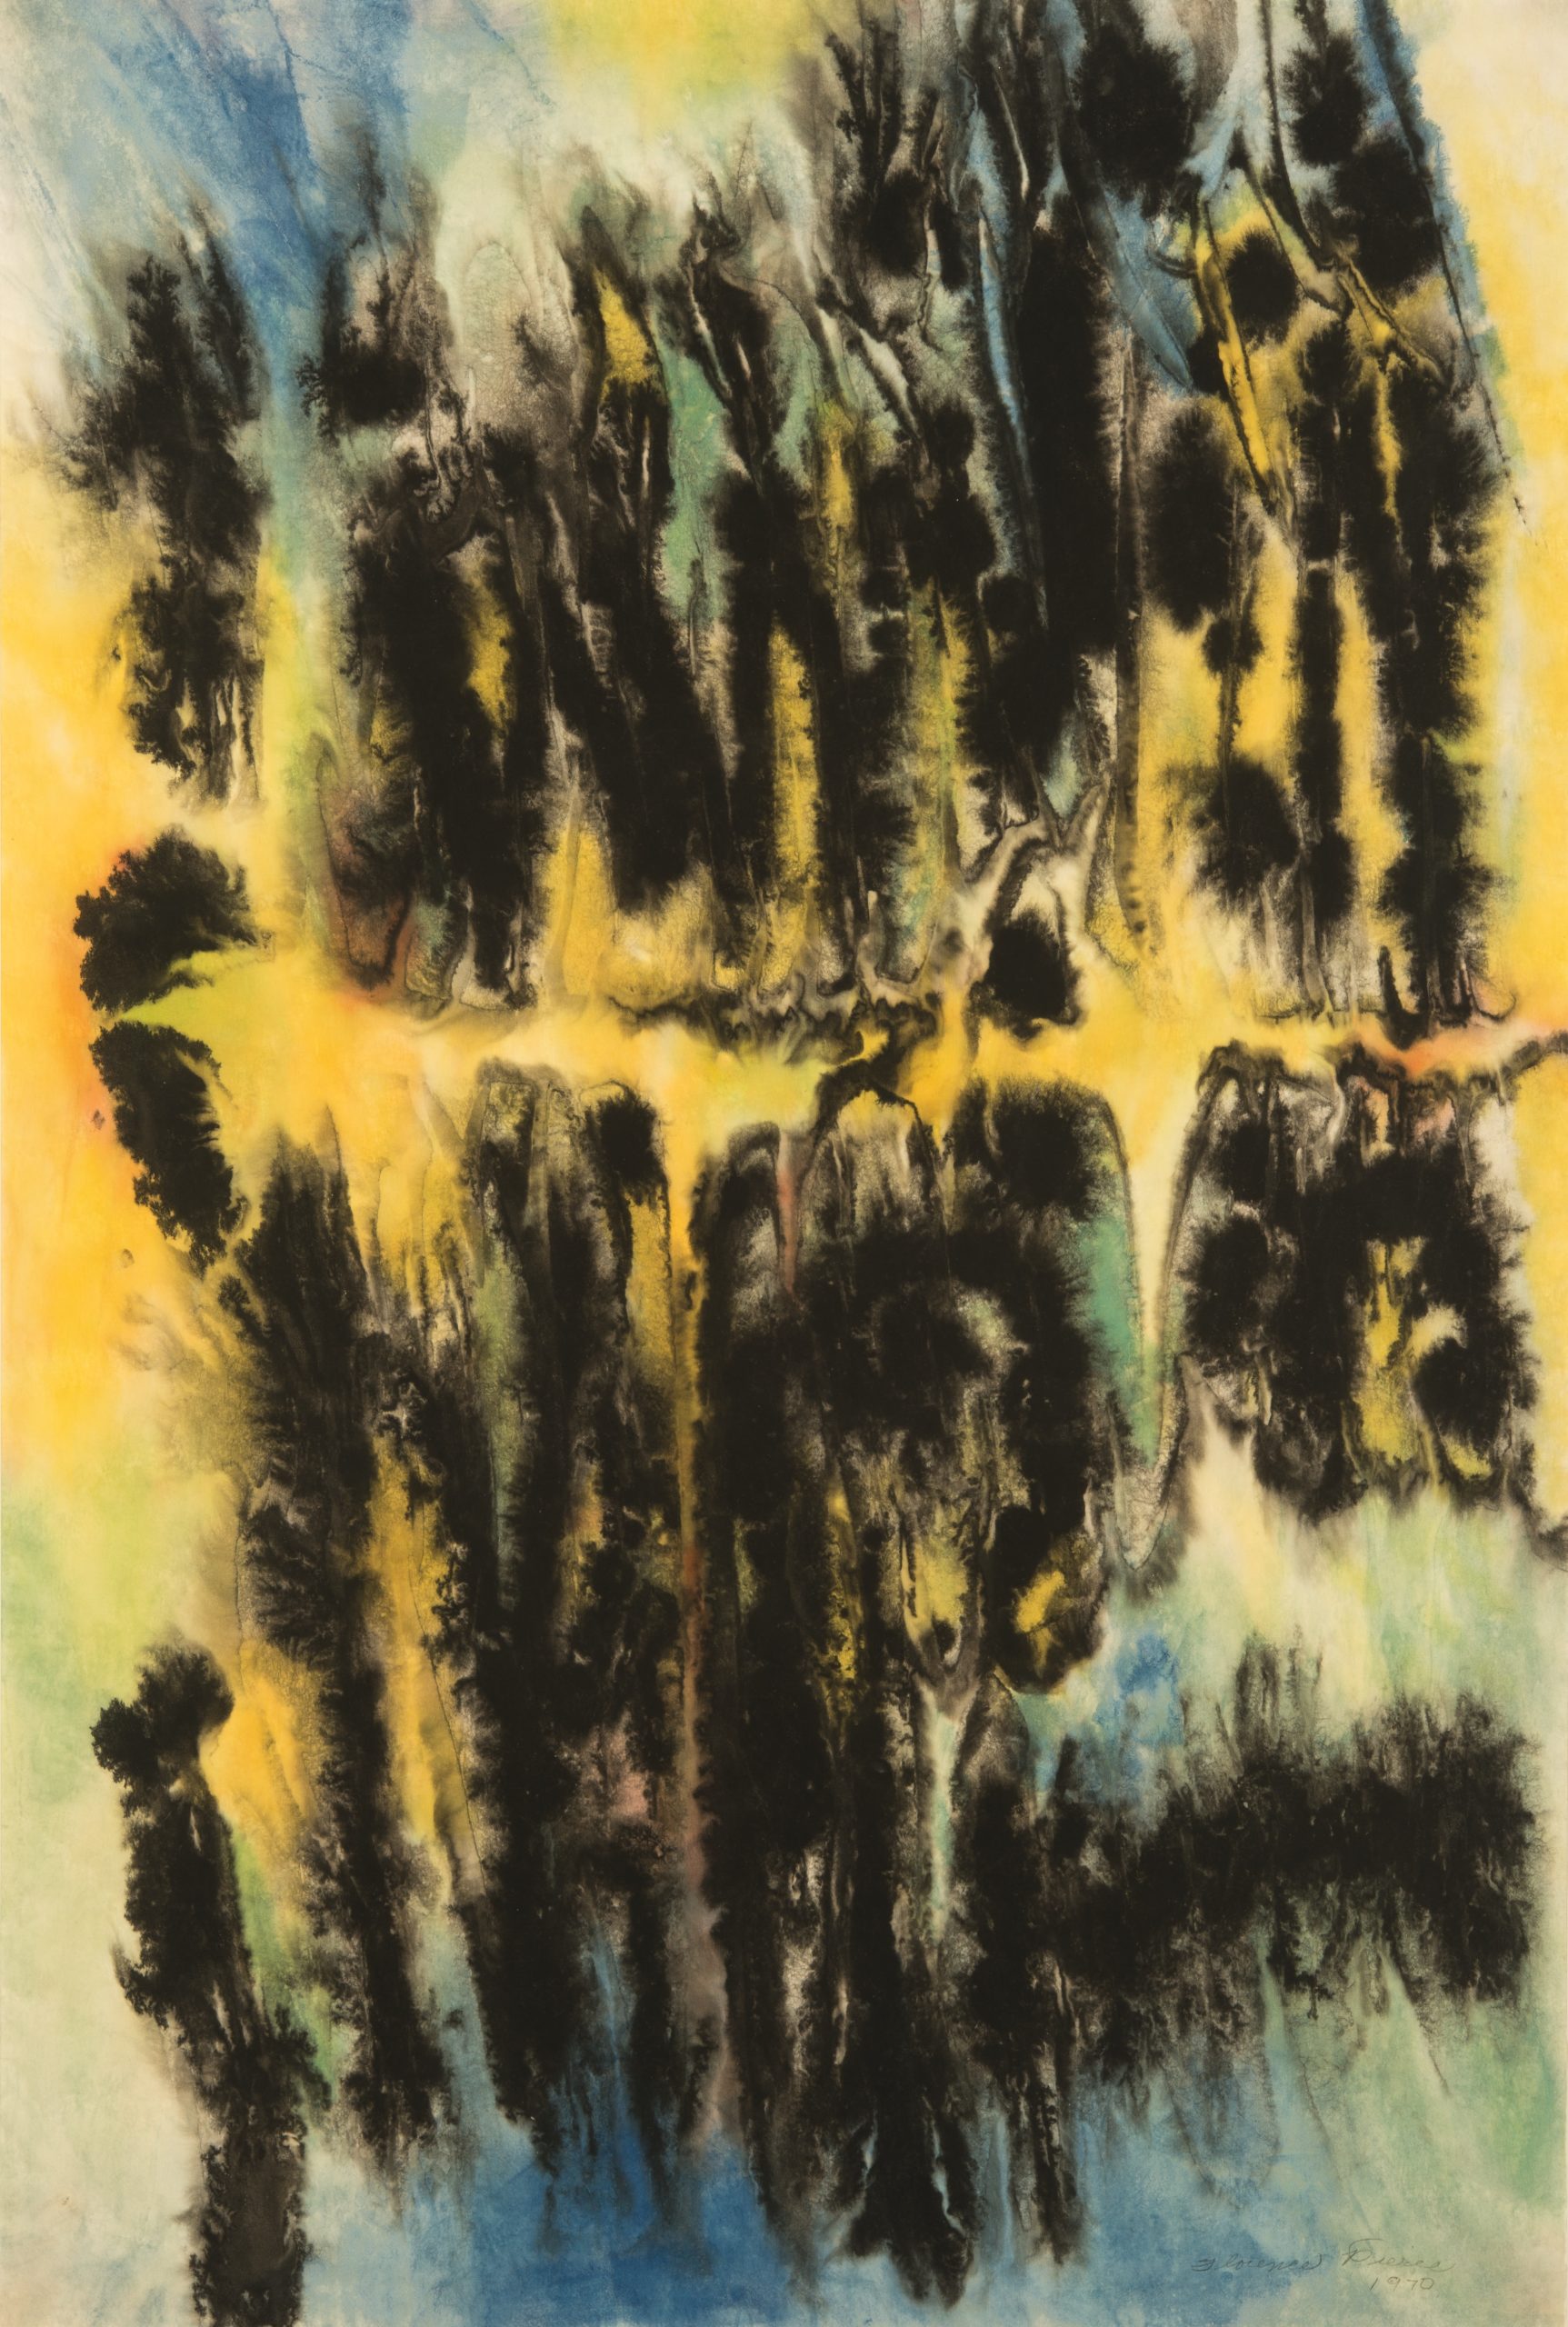 
		                					Florence Miller Pierce		                																	
																											<i>Untitled 1970,</i>  
																																								1970, 
																																								sumi ink on rice paper, 
																																								39 x 29 x 2 inches 
																								
		                				